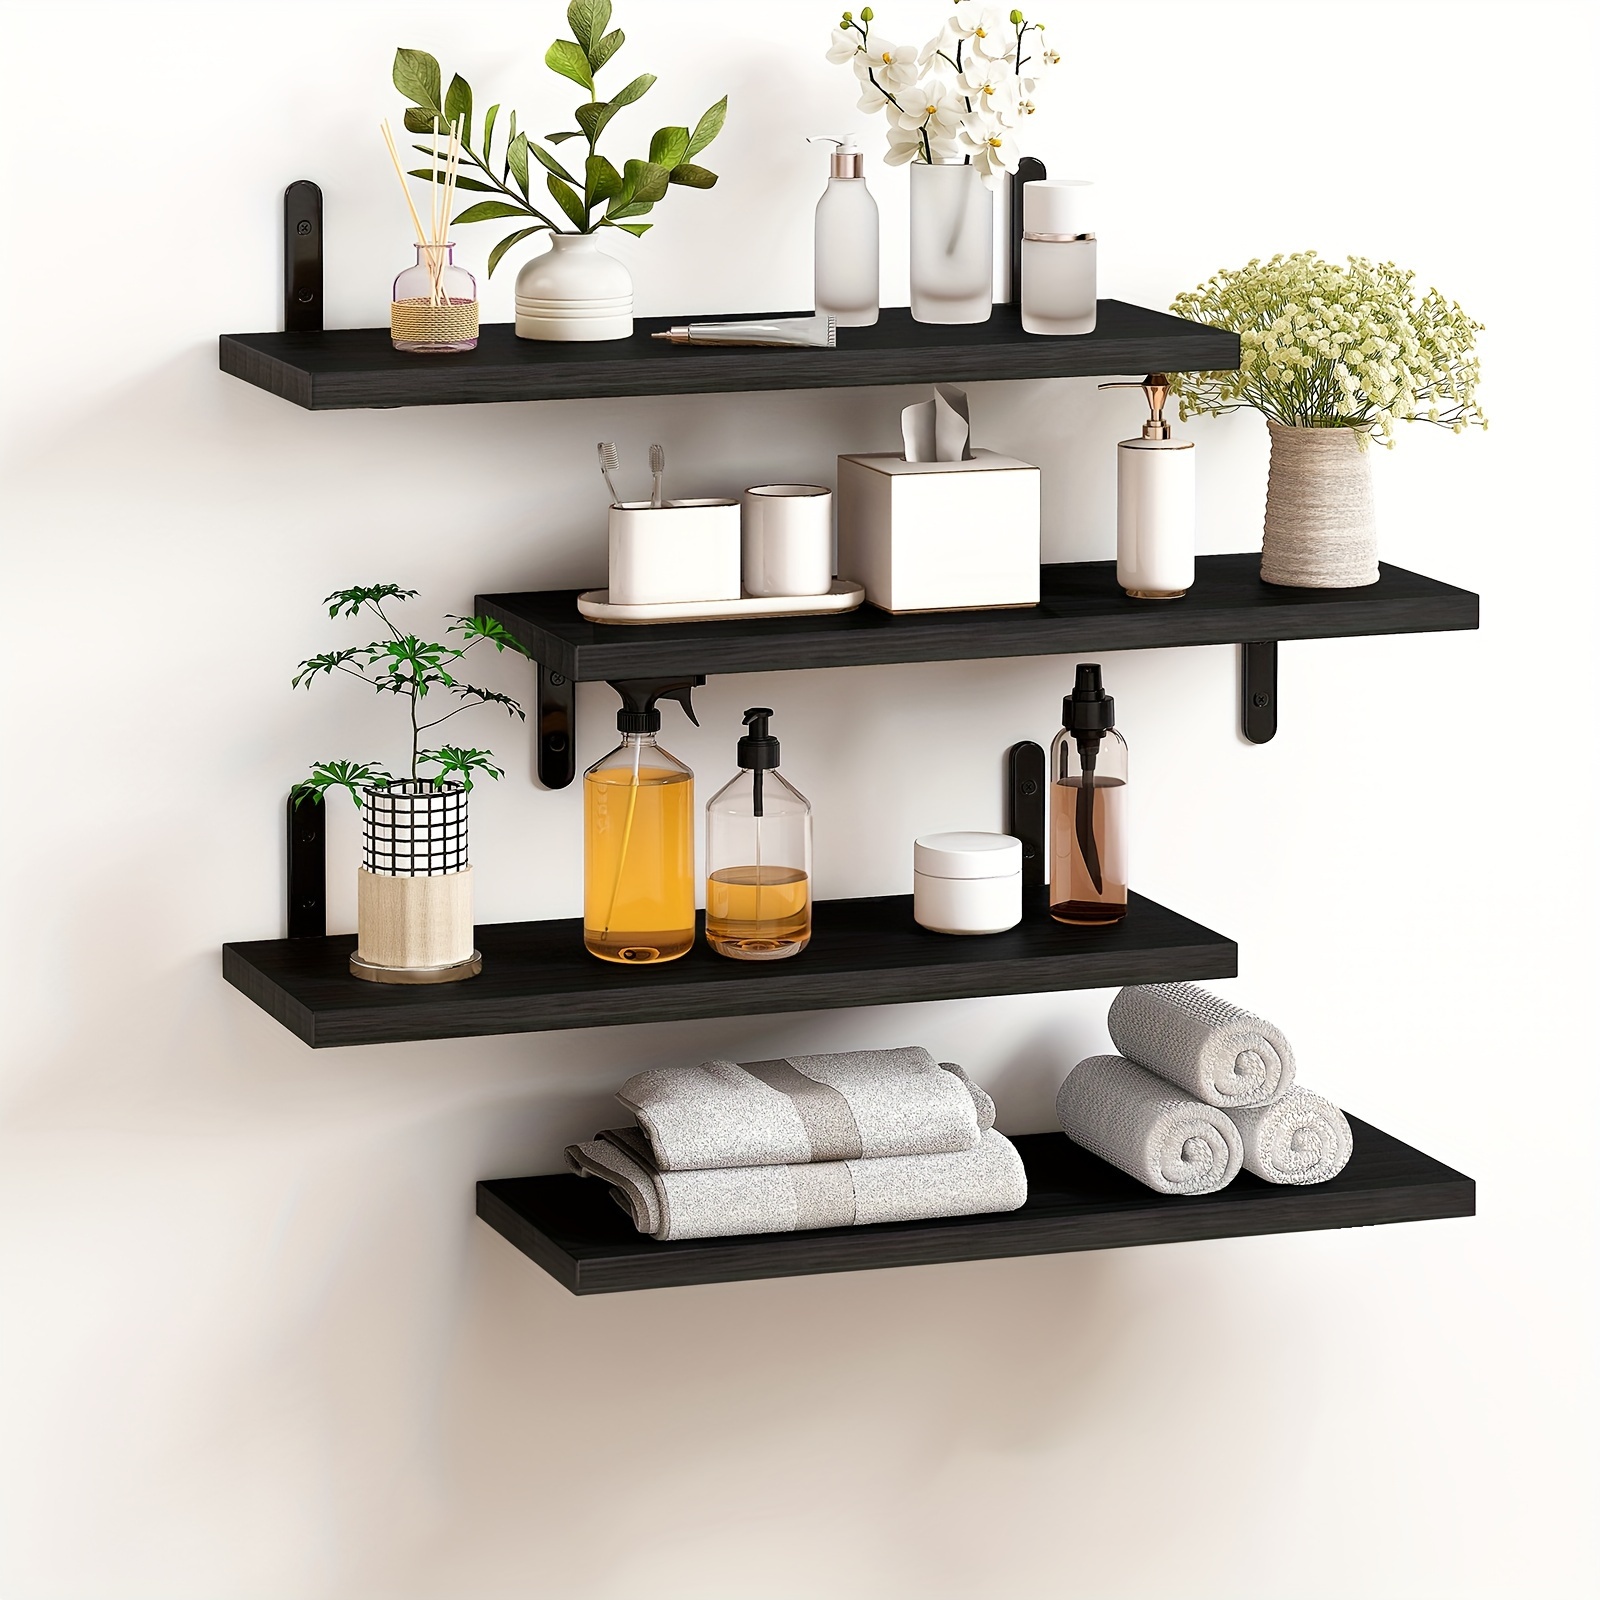 

Floating Shelves, 4+1 Tier Black Floating Shelves Rustic Wall Mounted Shelf, Bathroom Shelves Over Toilet With Wire Storage Basket, Farmhouse Wall Decor For Trophies, Collectibles, Books, And Photos